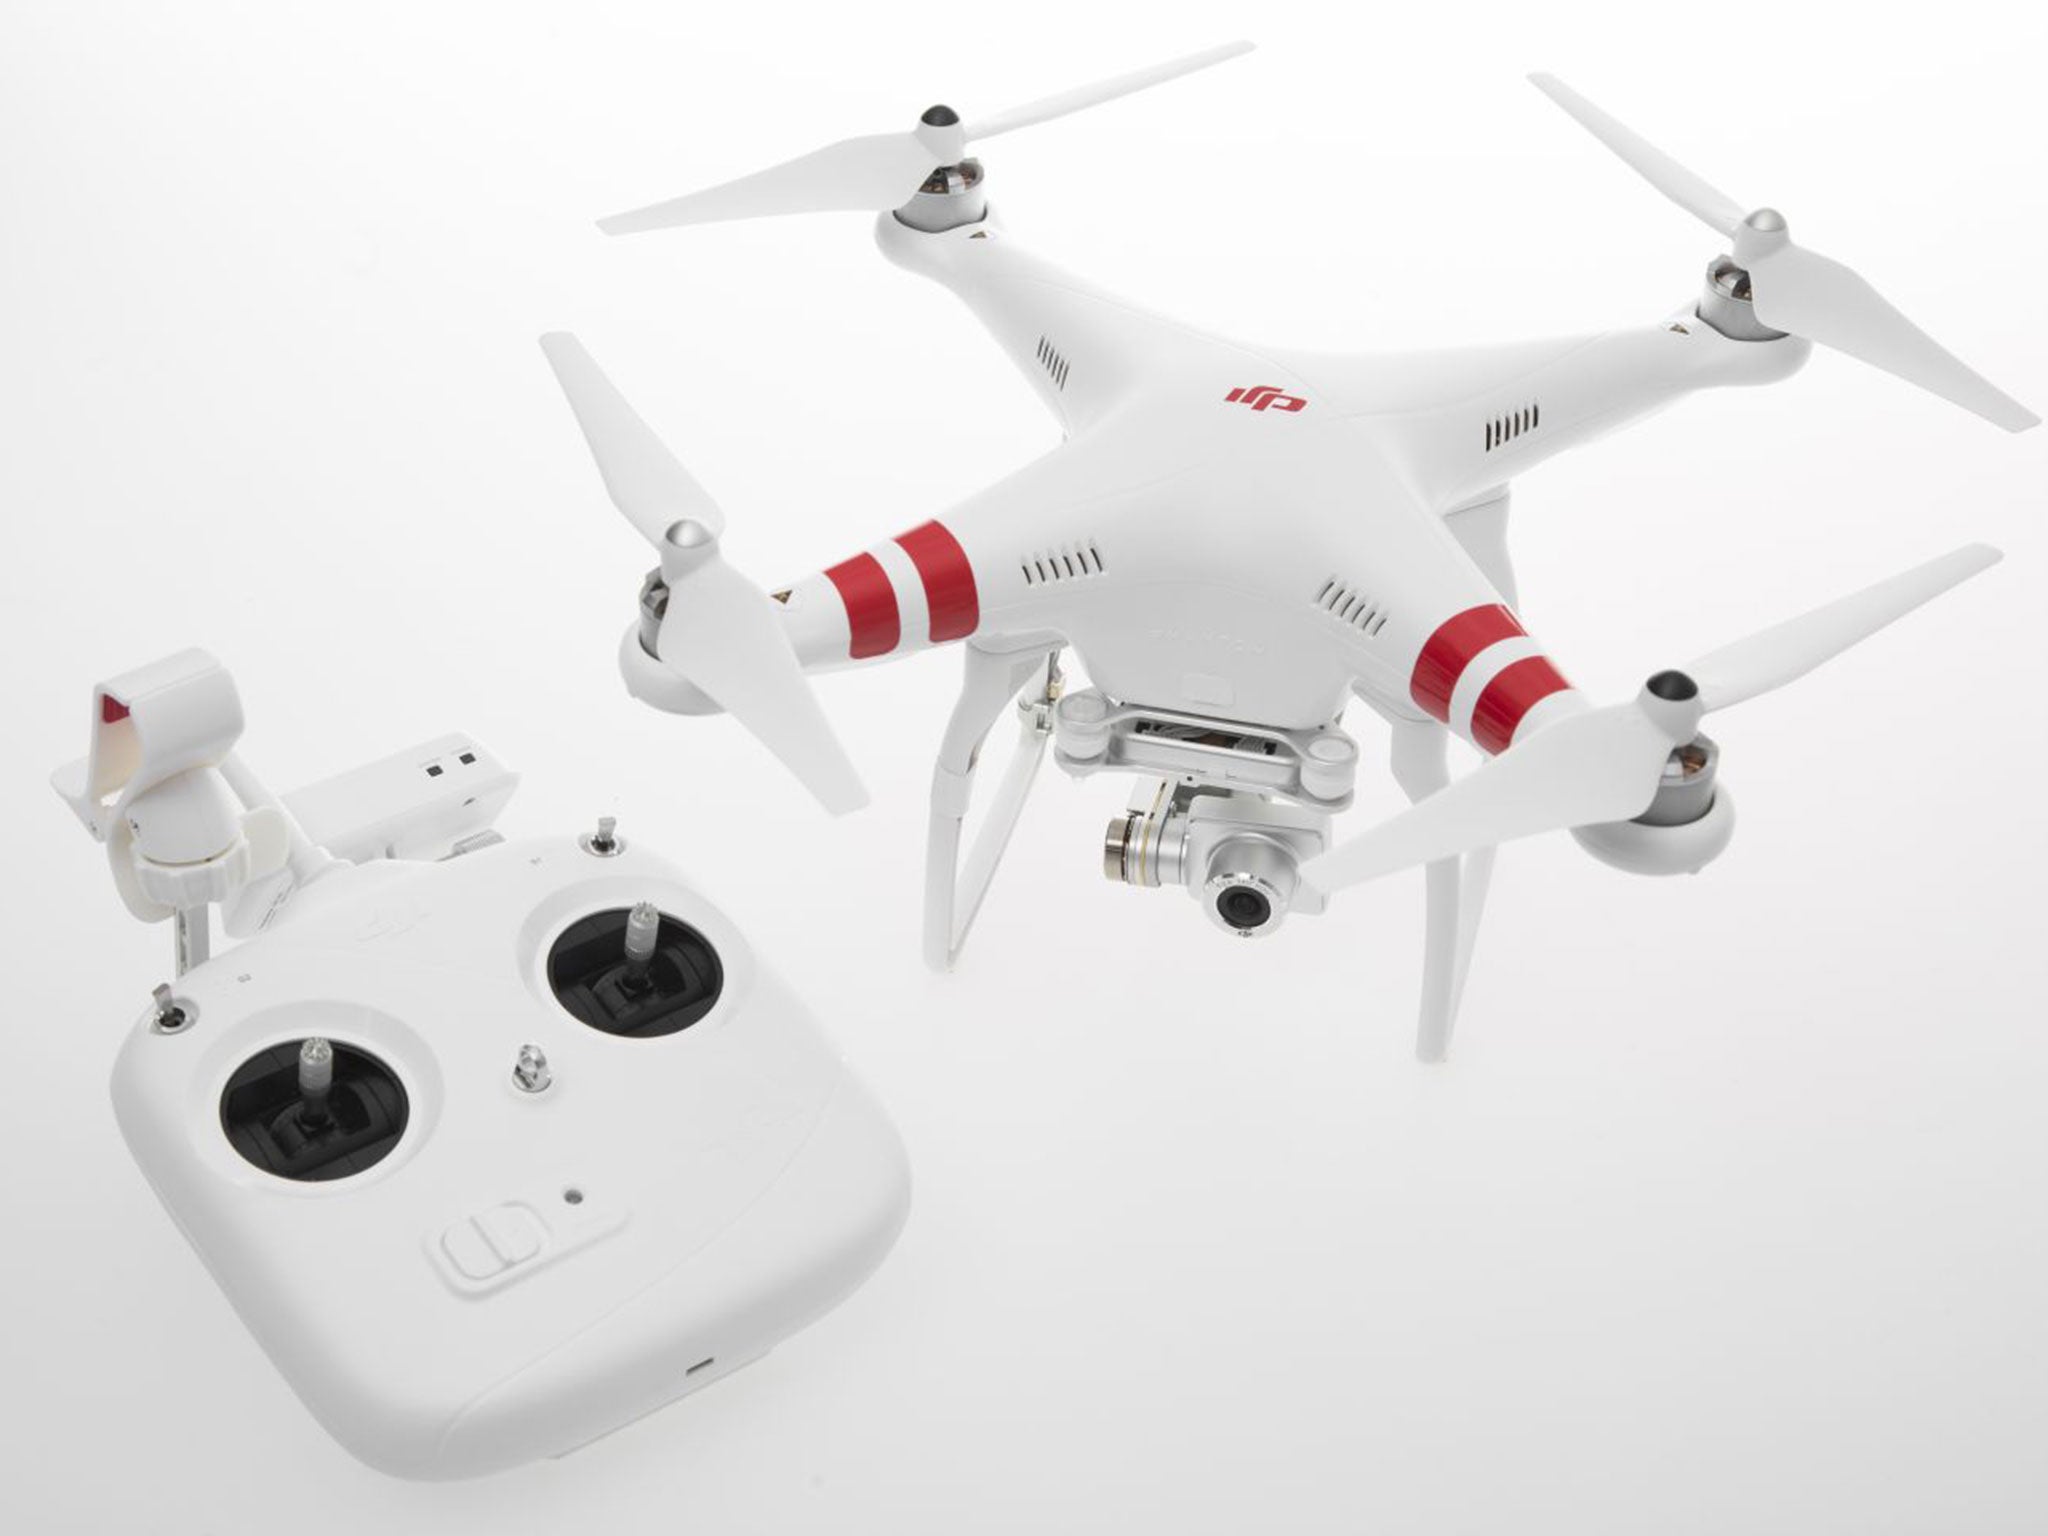 Regulations imposed on drones such as the DJI Phantom (pictured) include a ban on flying over congested areas or within 50 metres of people or buildings without official permission